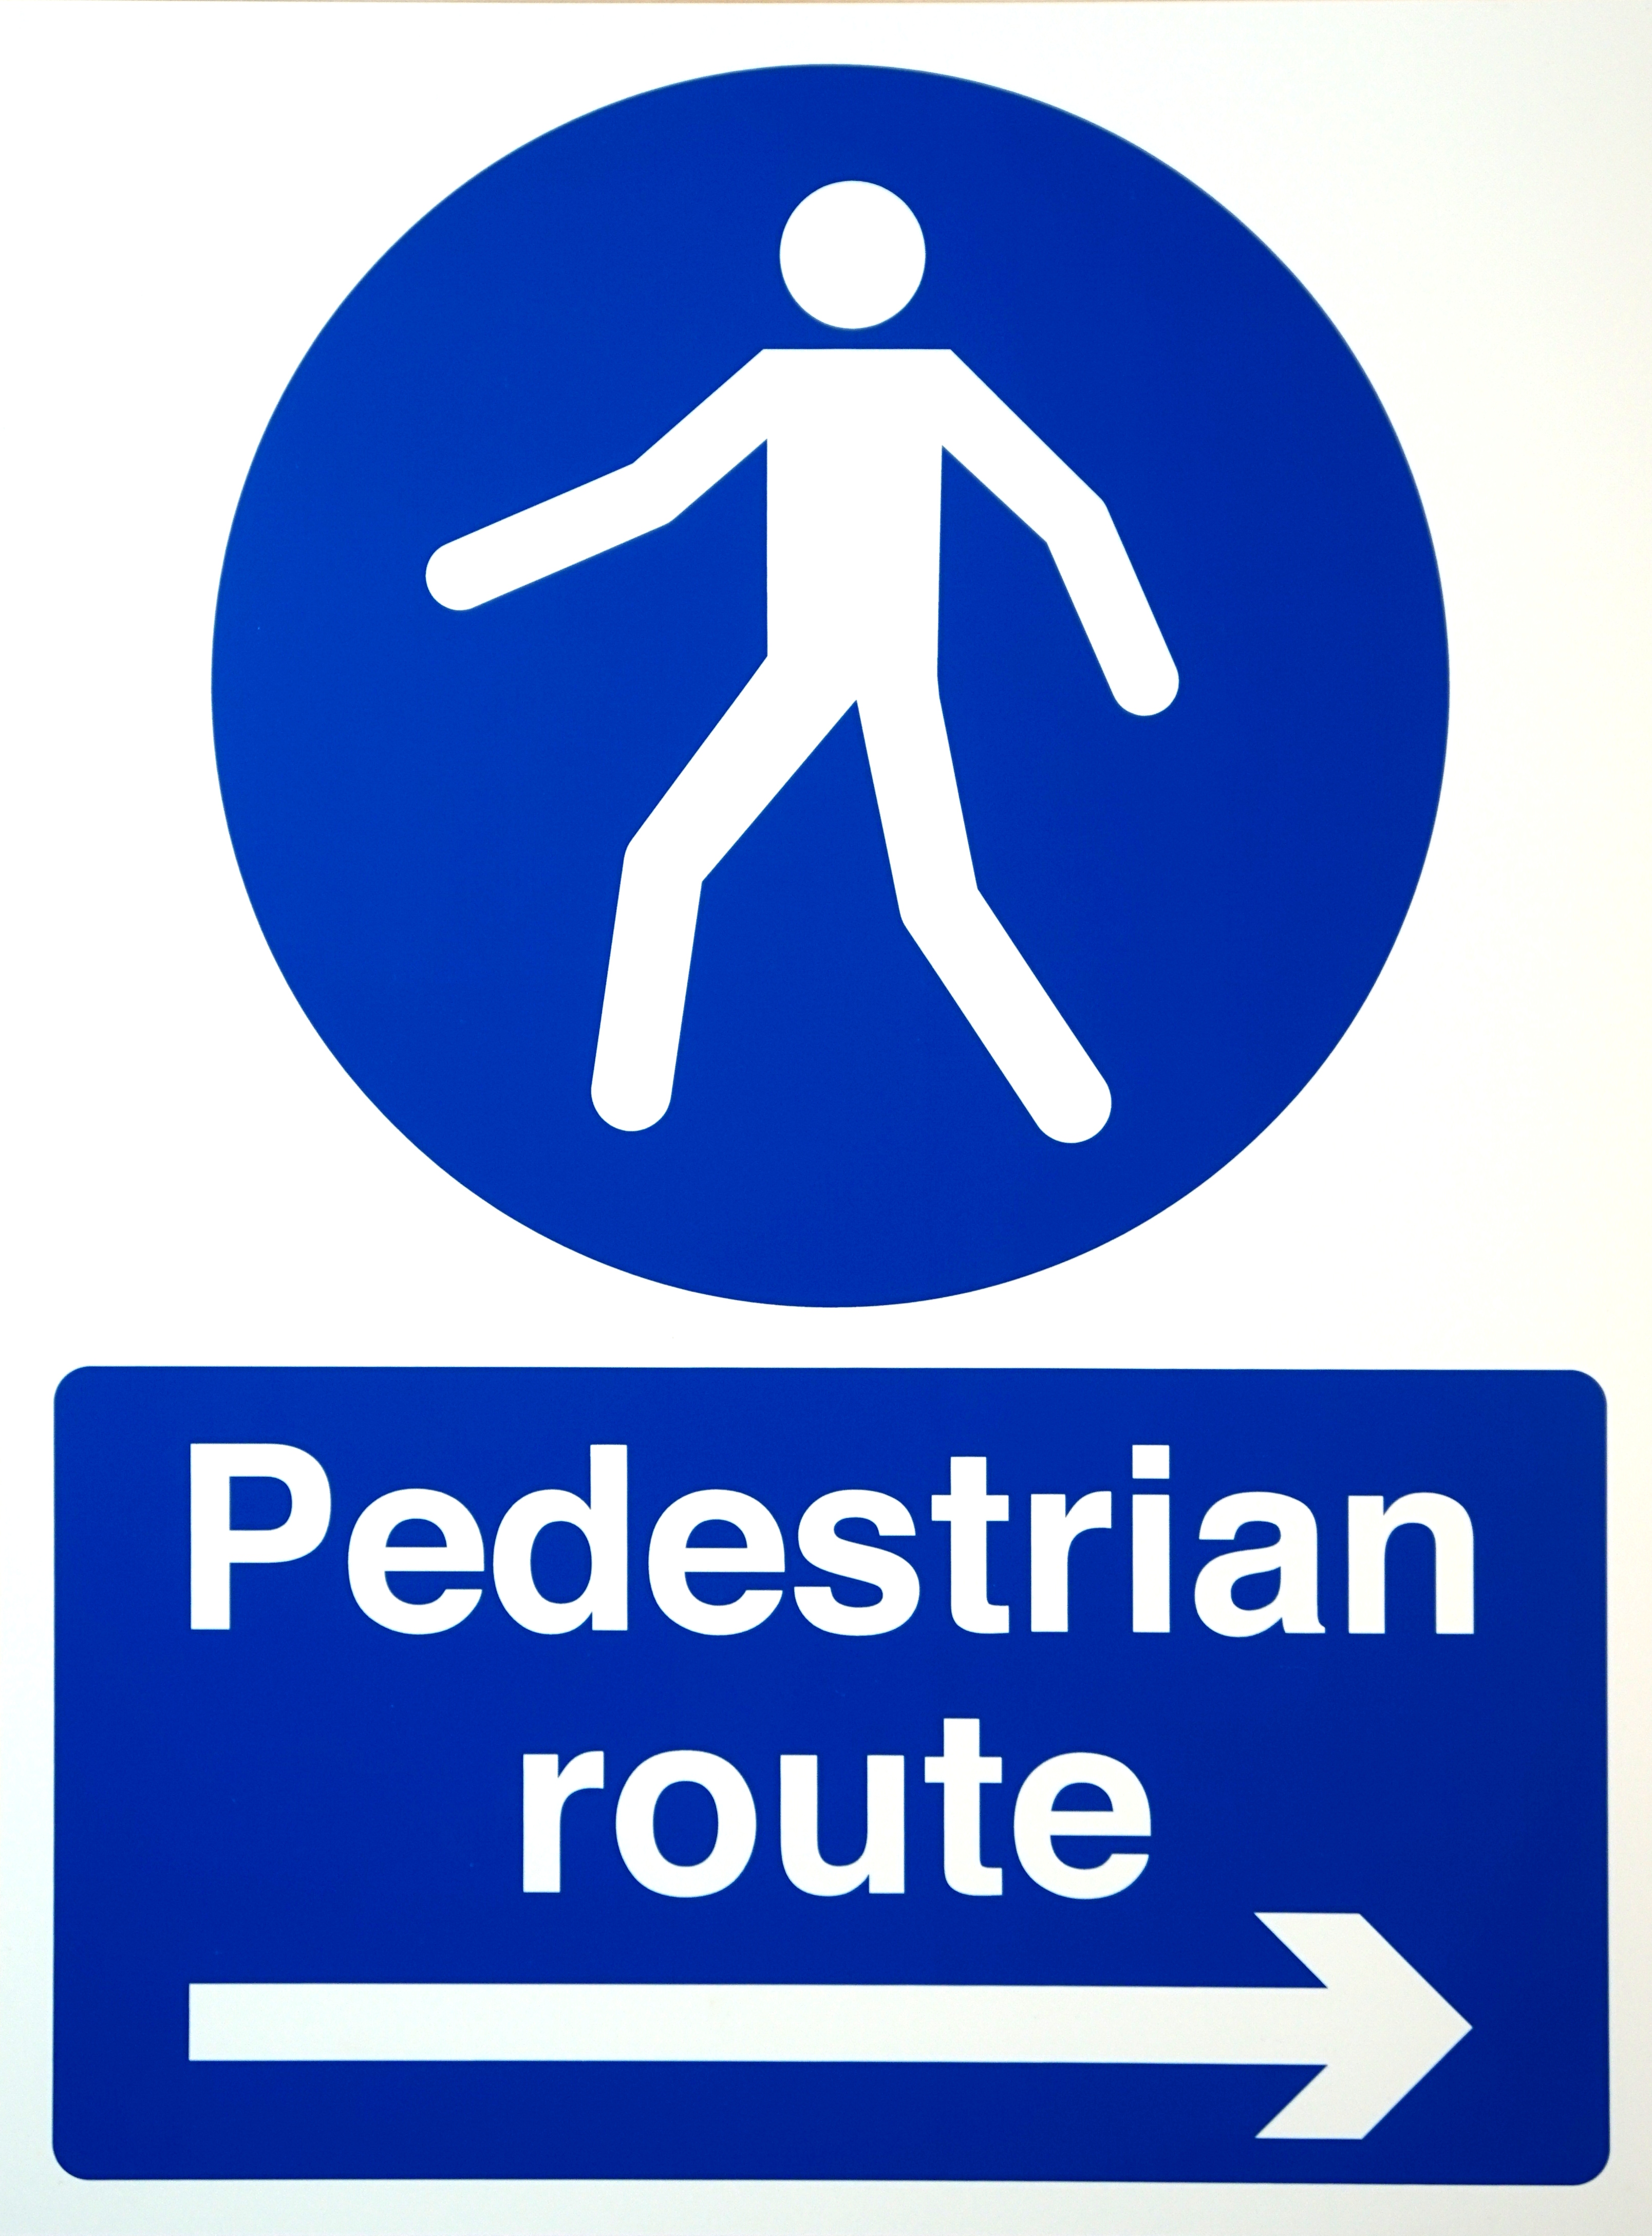 600x450mm Pedestrian Route with arrow to the right sign, 3mm Foamed Plastic